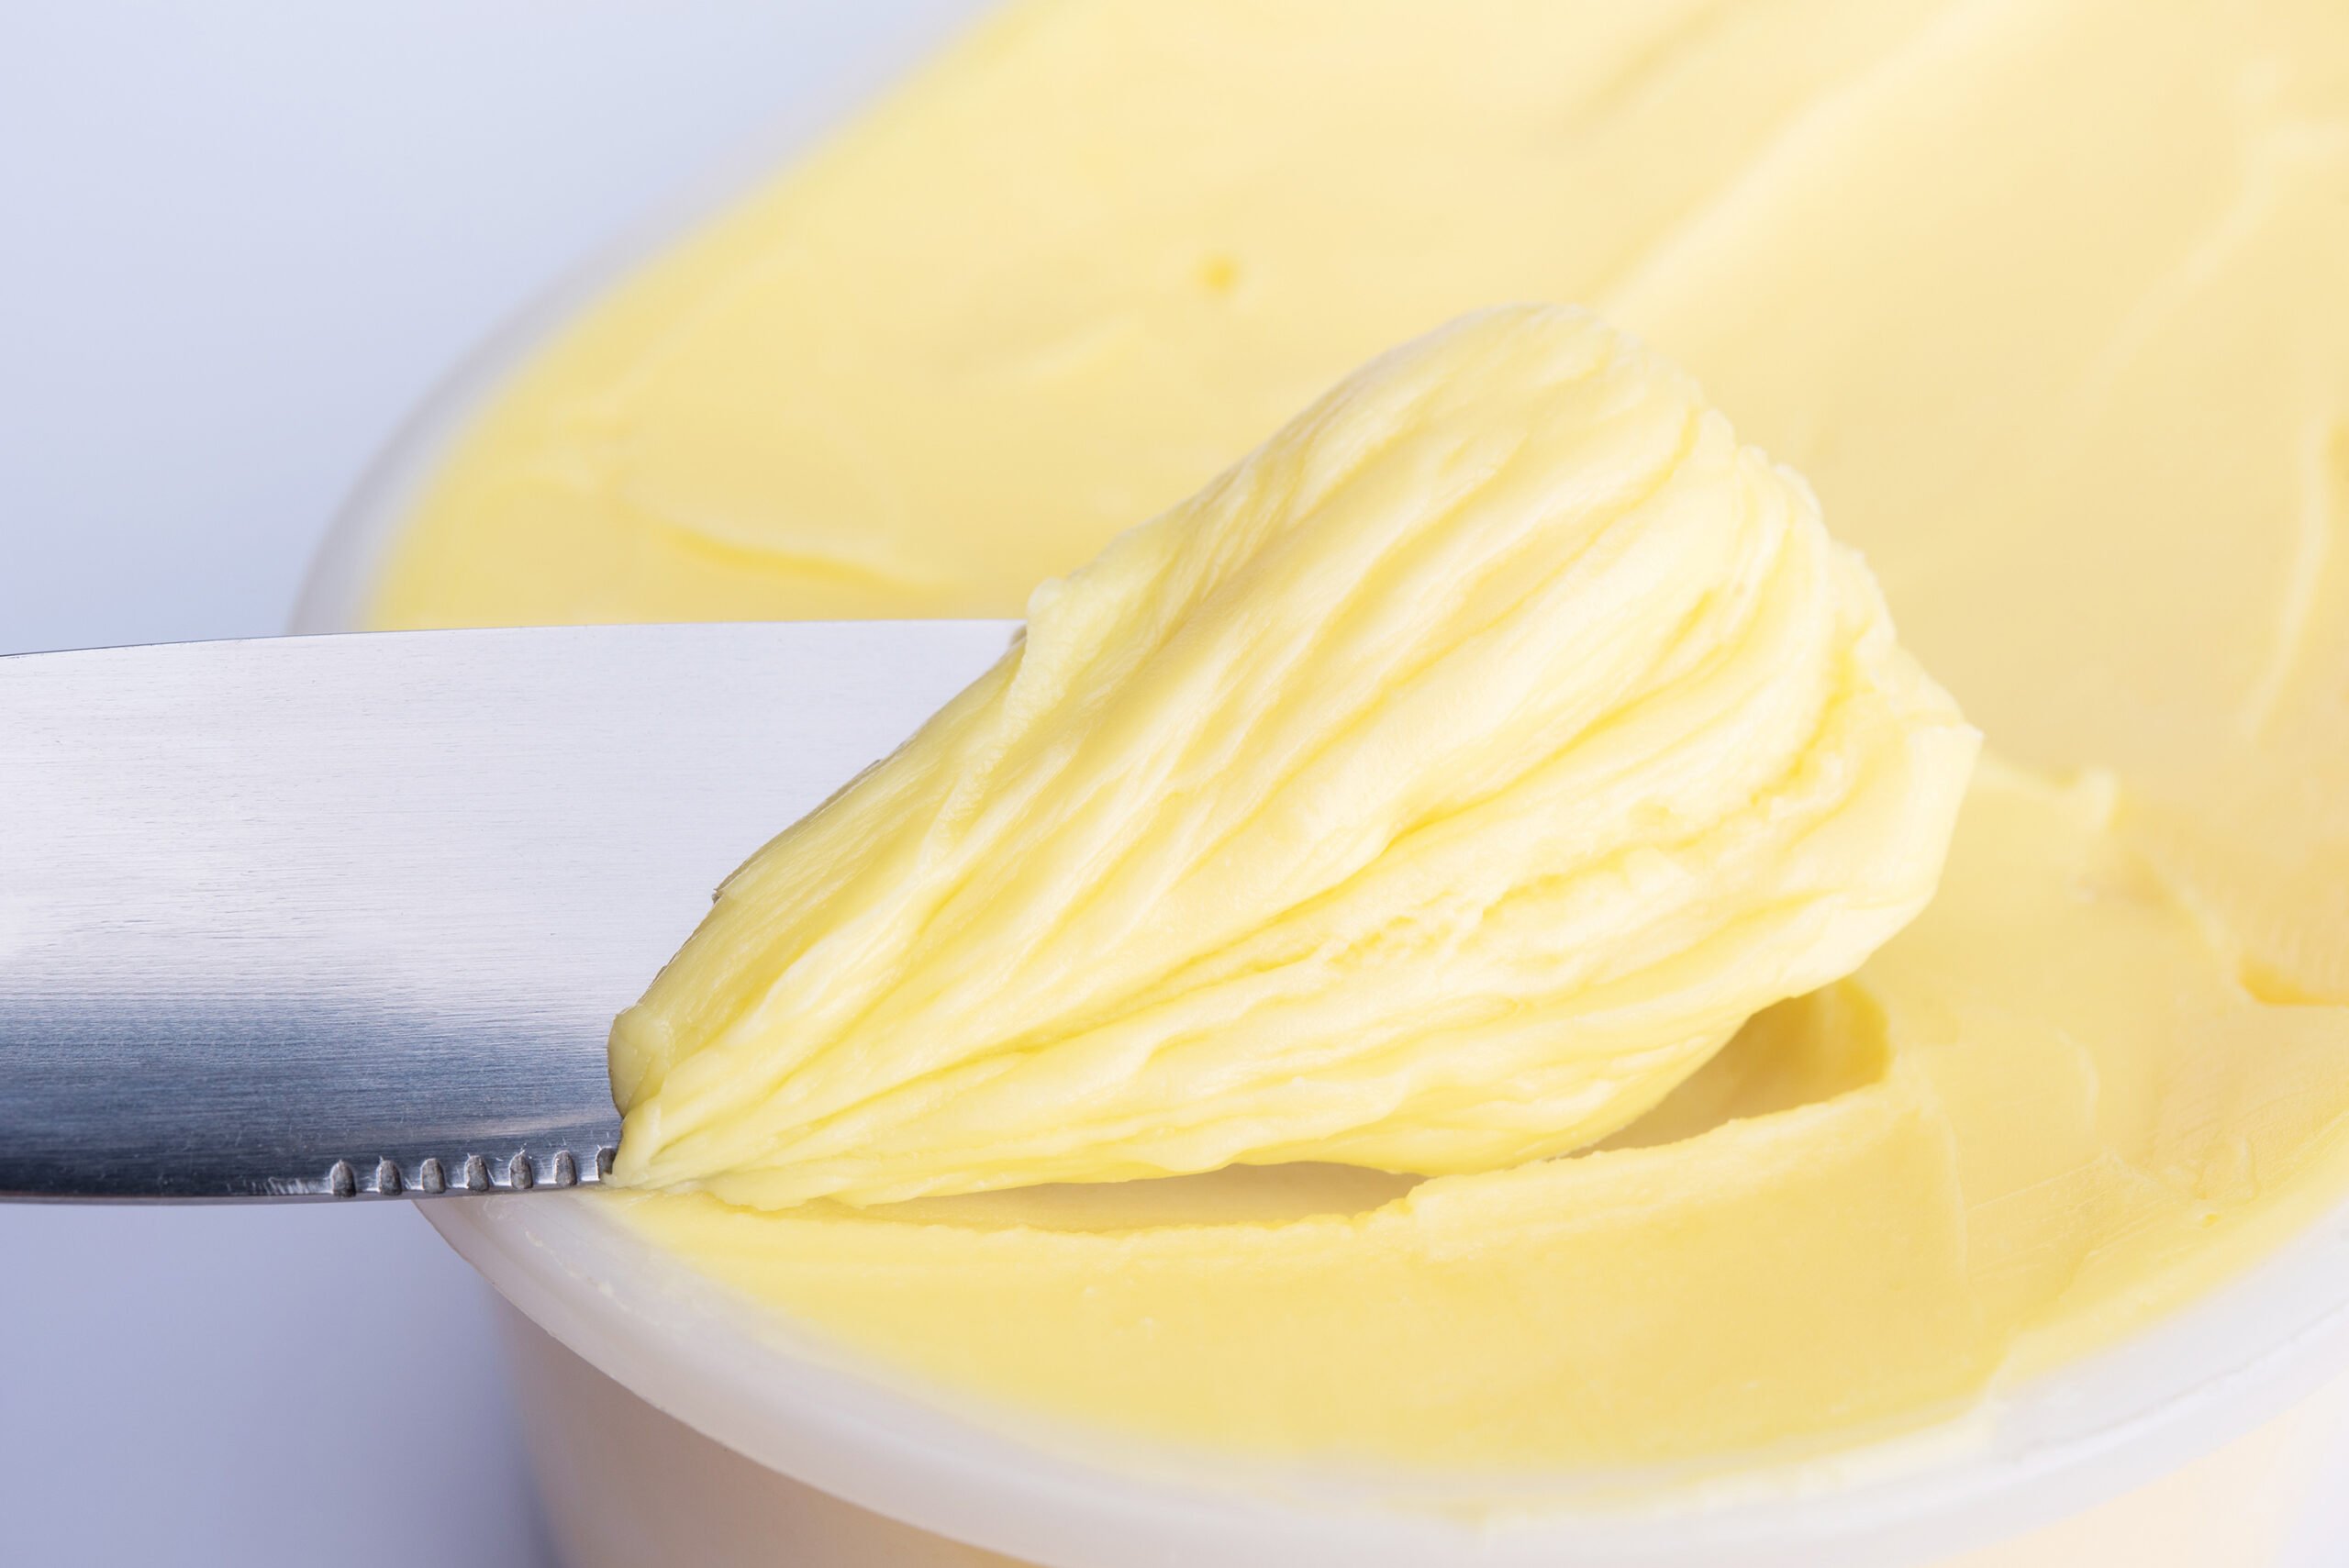 A margarine giant publishes its methane emissions and calls on manufacturers to do the same